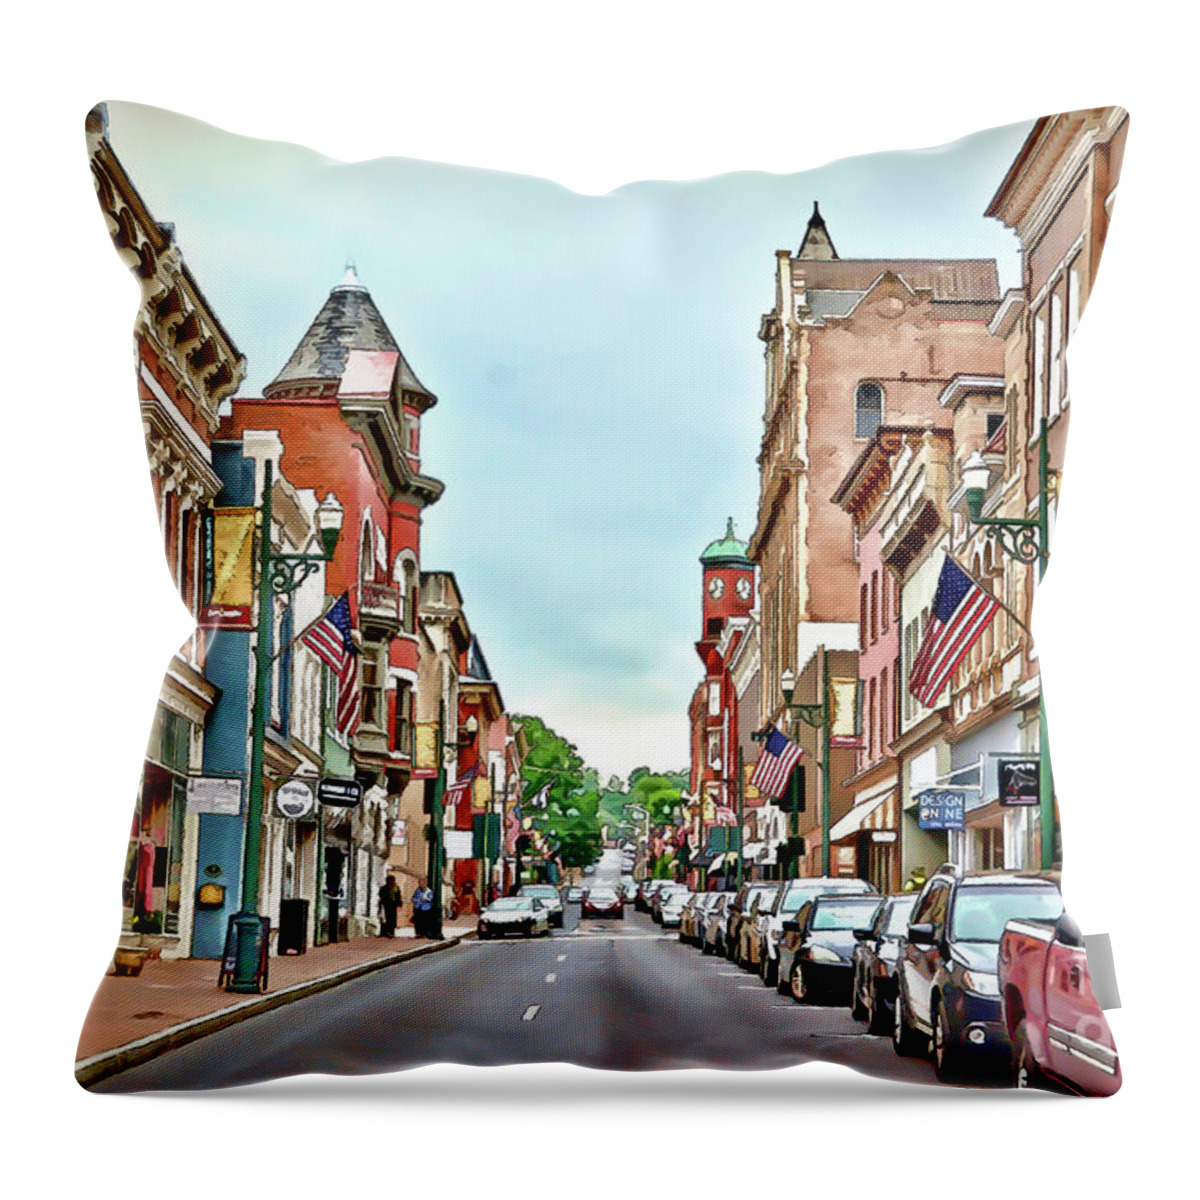 Beverley Historic District Throw Pillow featuring the photograph Beverley Historic District - Staunton Virginia - Art of the Small Town by Kerri Farley